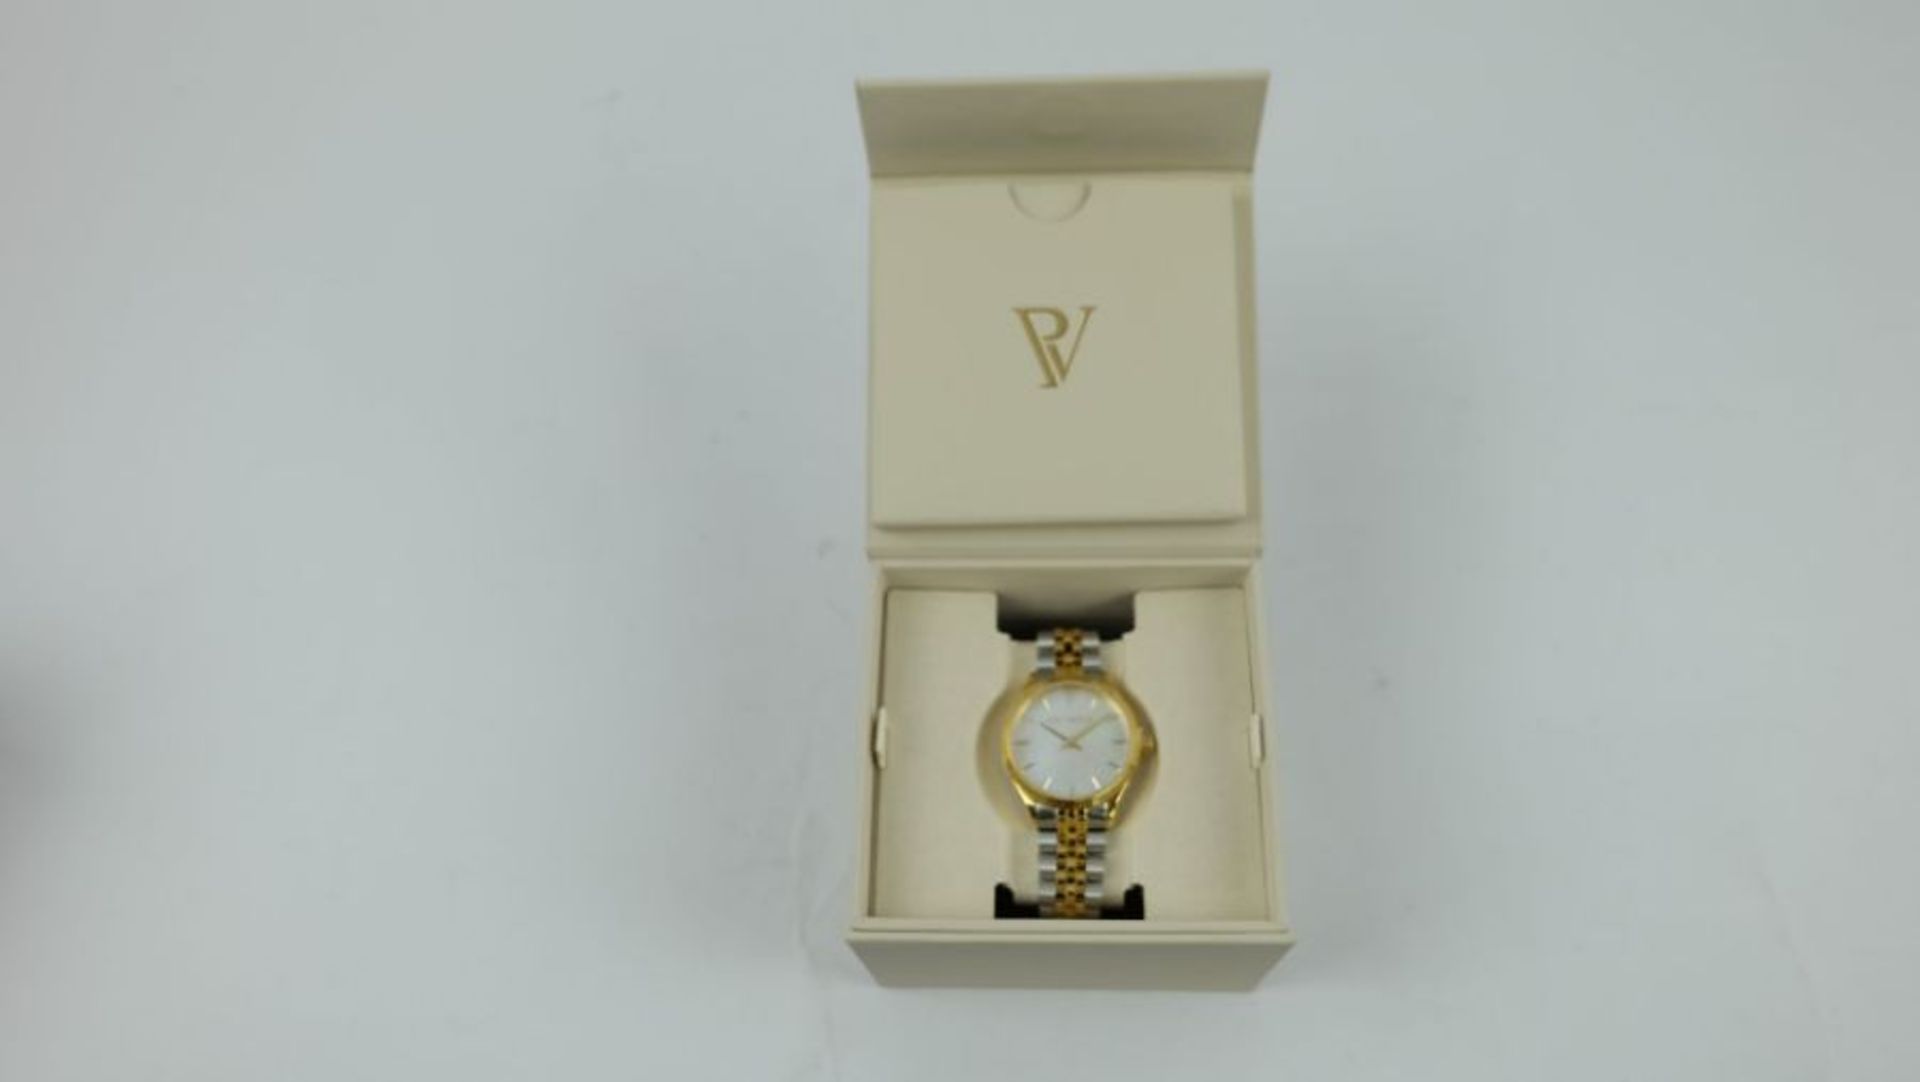 Paul Valentine Women's Watch Iconia Gold Silver 32mm.